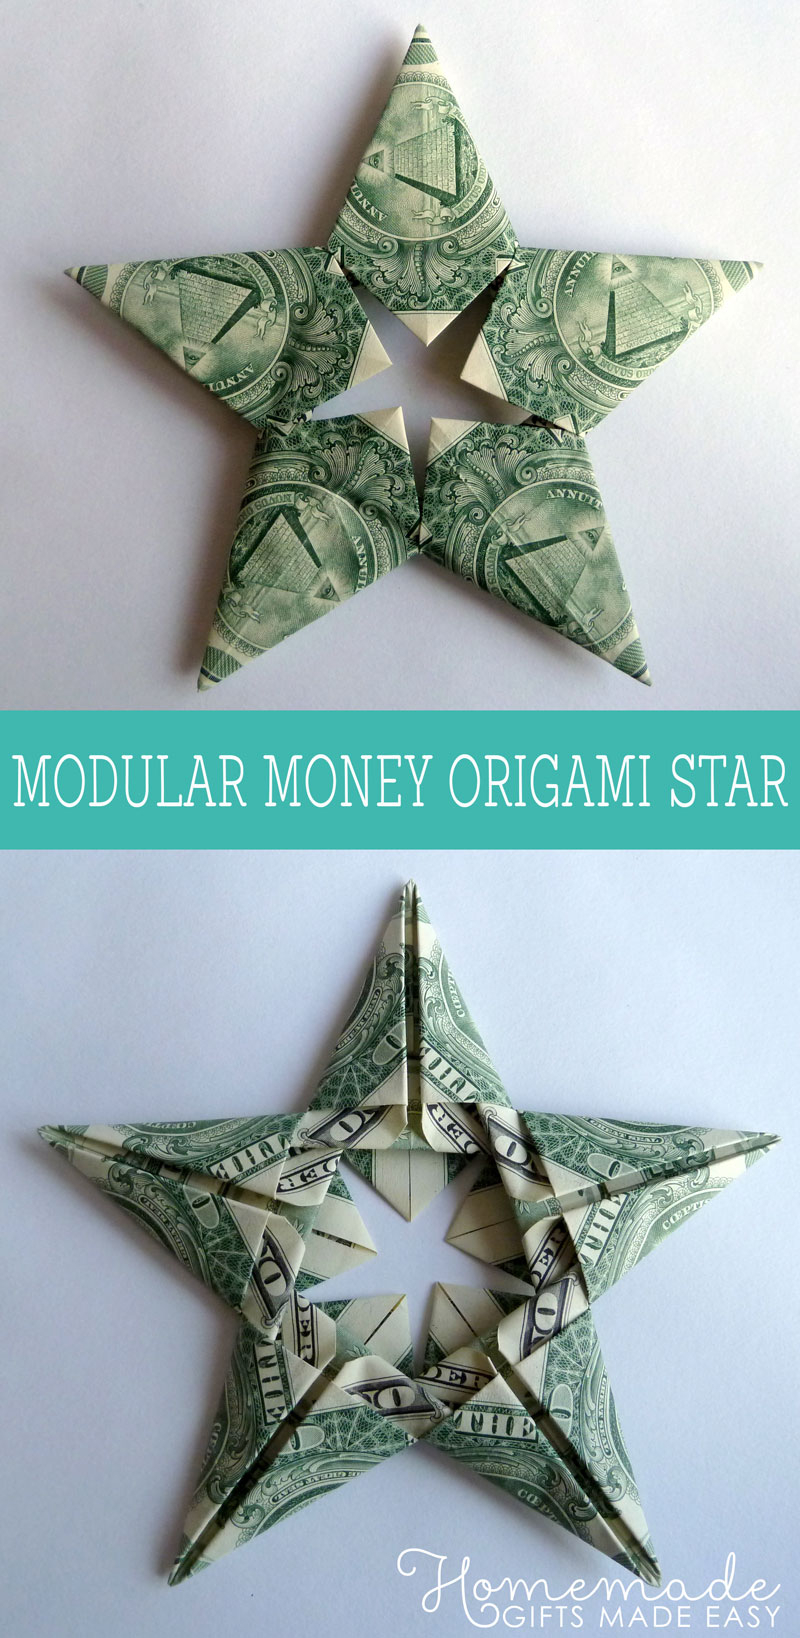 Ten Pound Note Origami Modular Money Origami Star From 5 Bills How To Fold Step Step